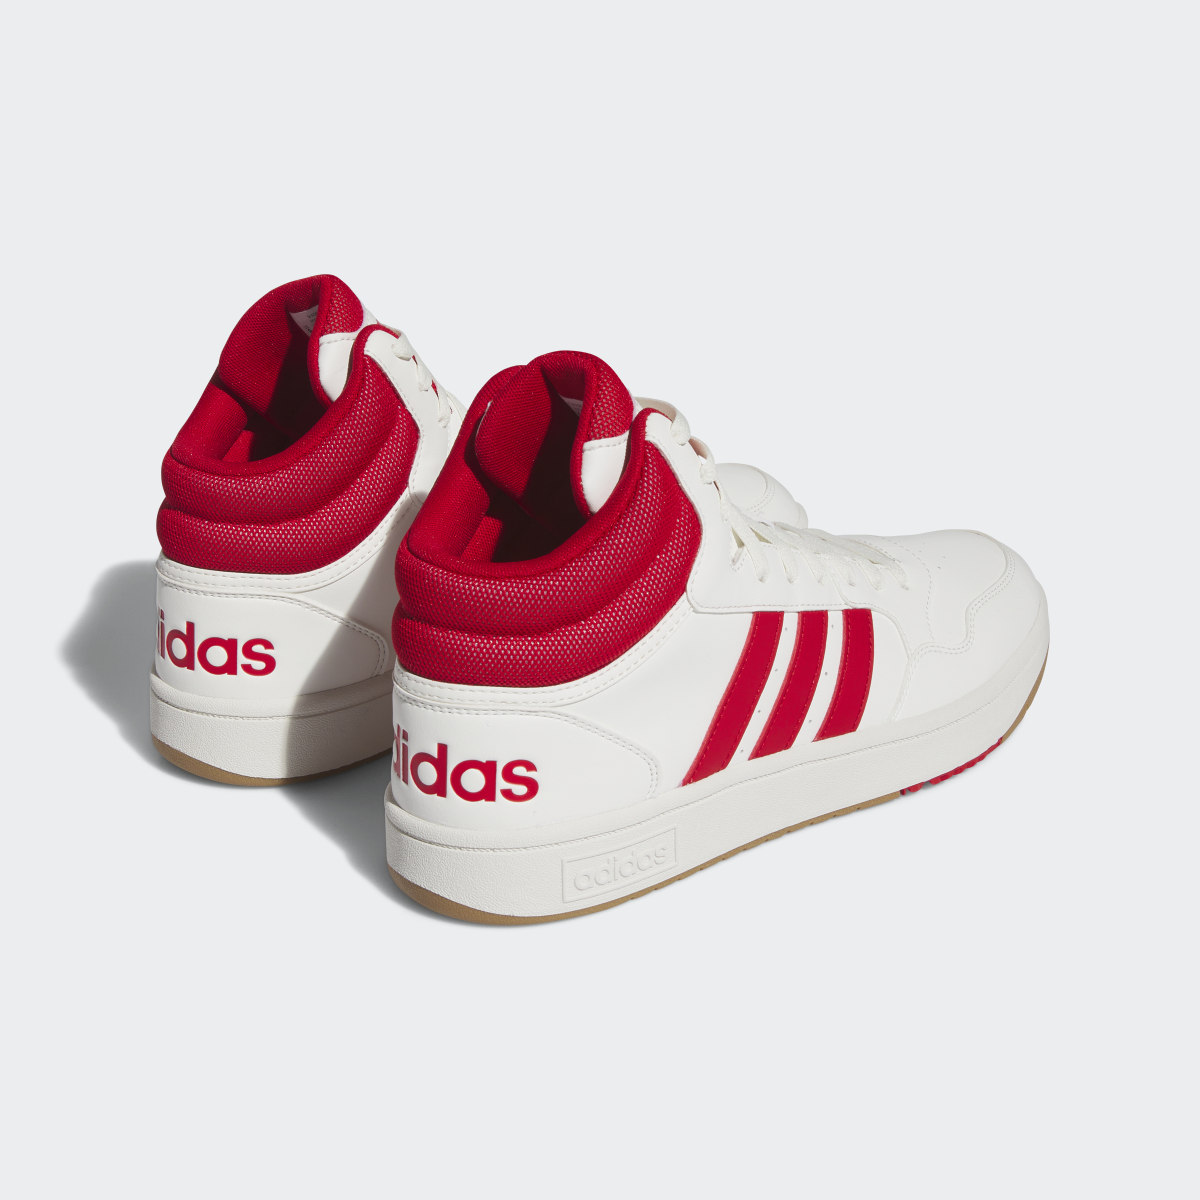 Adidas Hoops 3.0 Mid Lifestyle Basketball Classic Vintage Shoes. 6